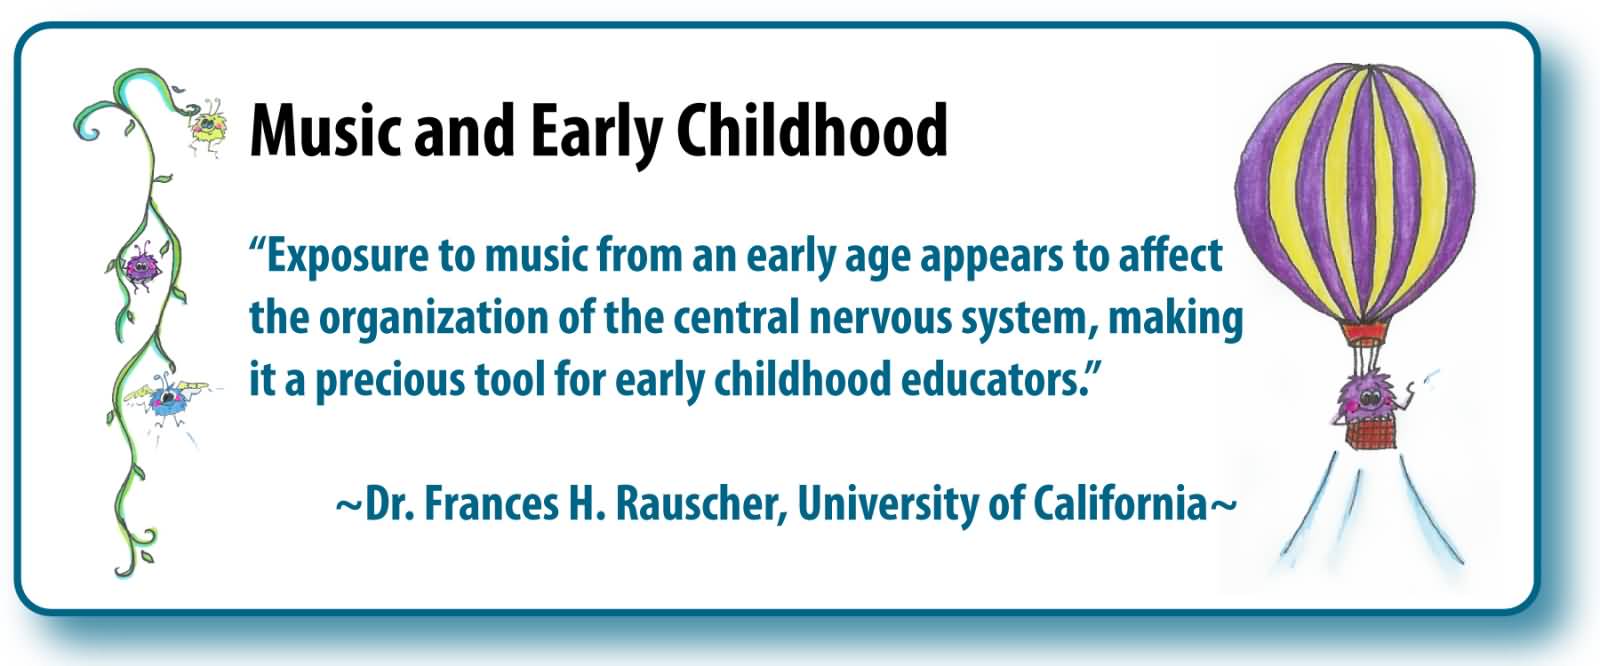 Exposure to music at an early age appears to affect the organization of the central nervous system making it a precious tool for early childhood educators  - Dr. Frances H. Rauscher